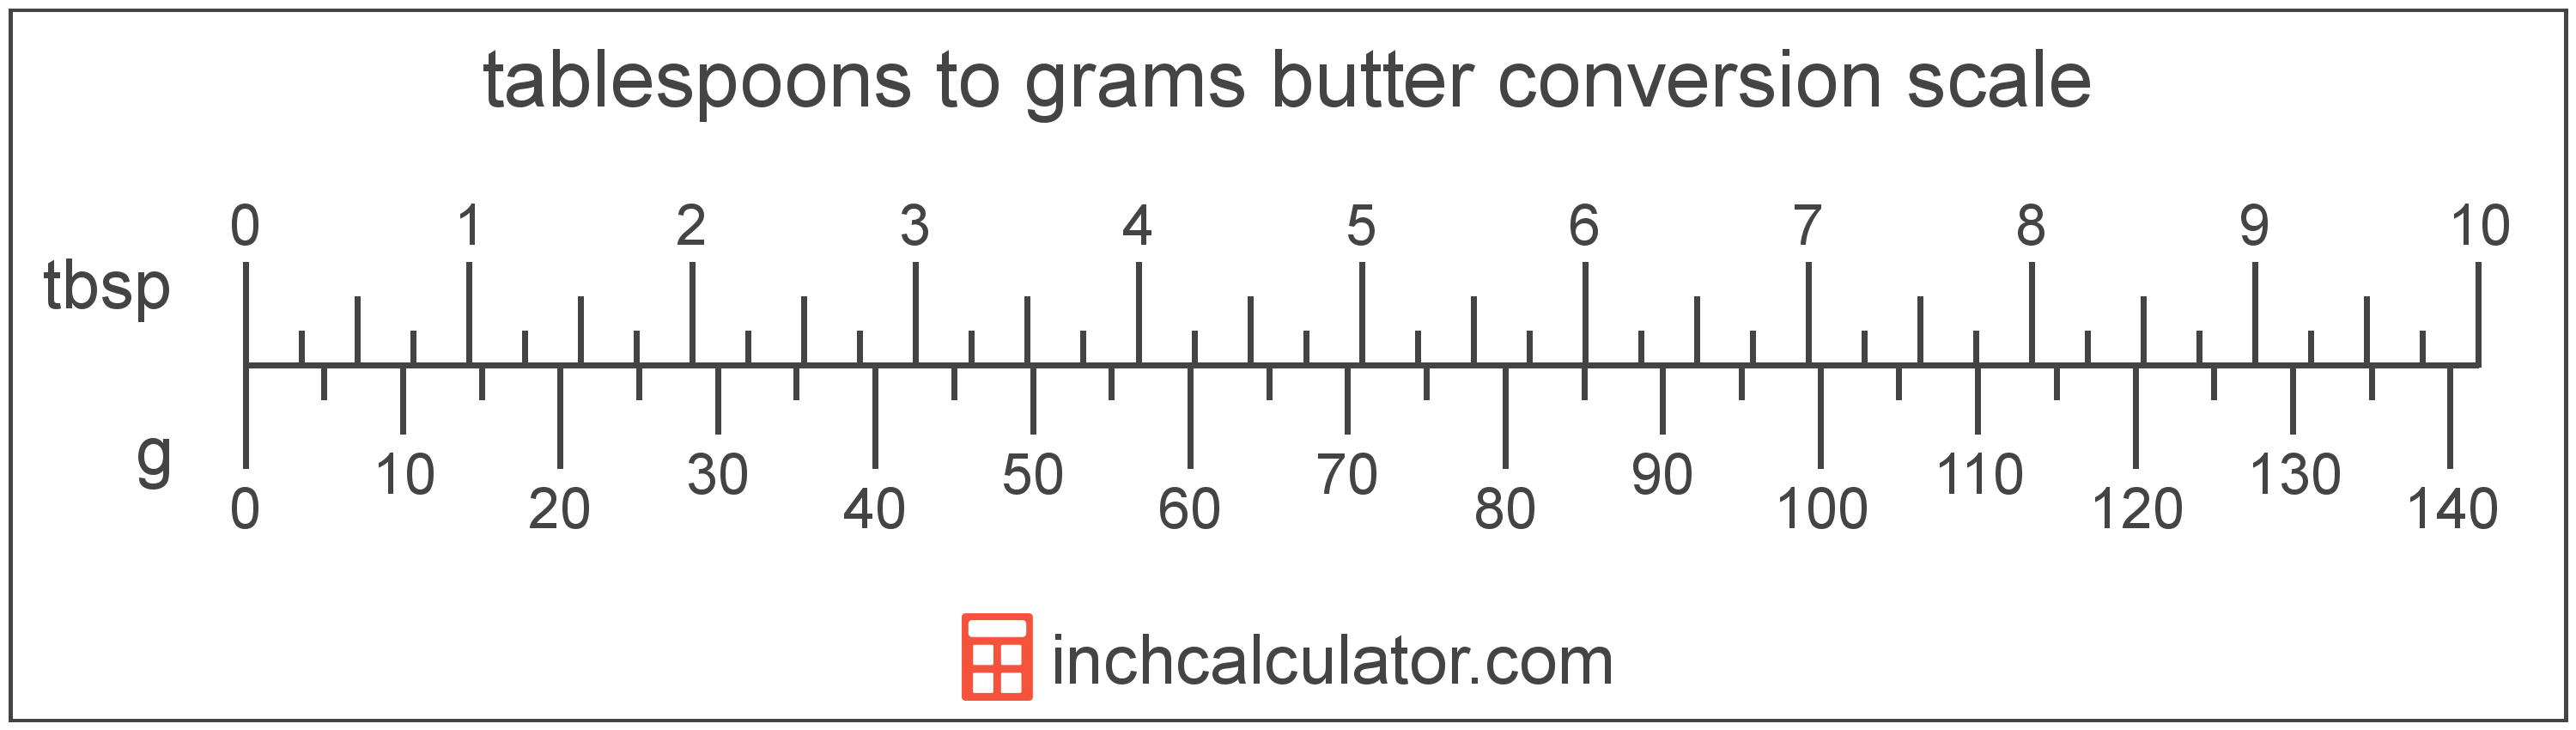 6 tablespoons butter to g